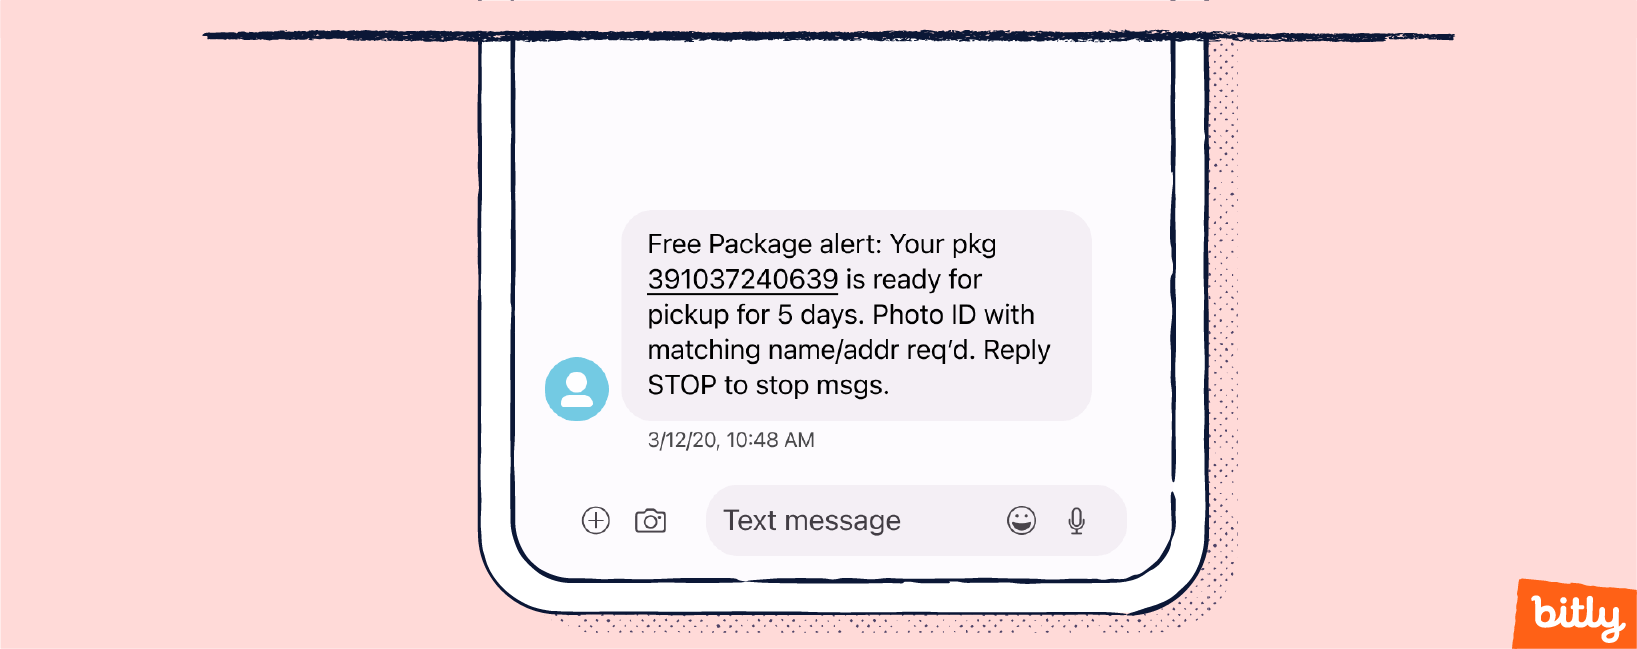 An SMS on a smartphone informing a customer when their package can be picked up.